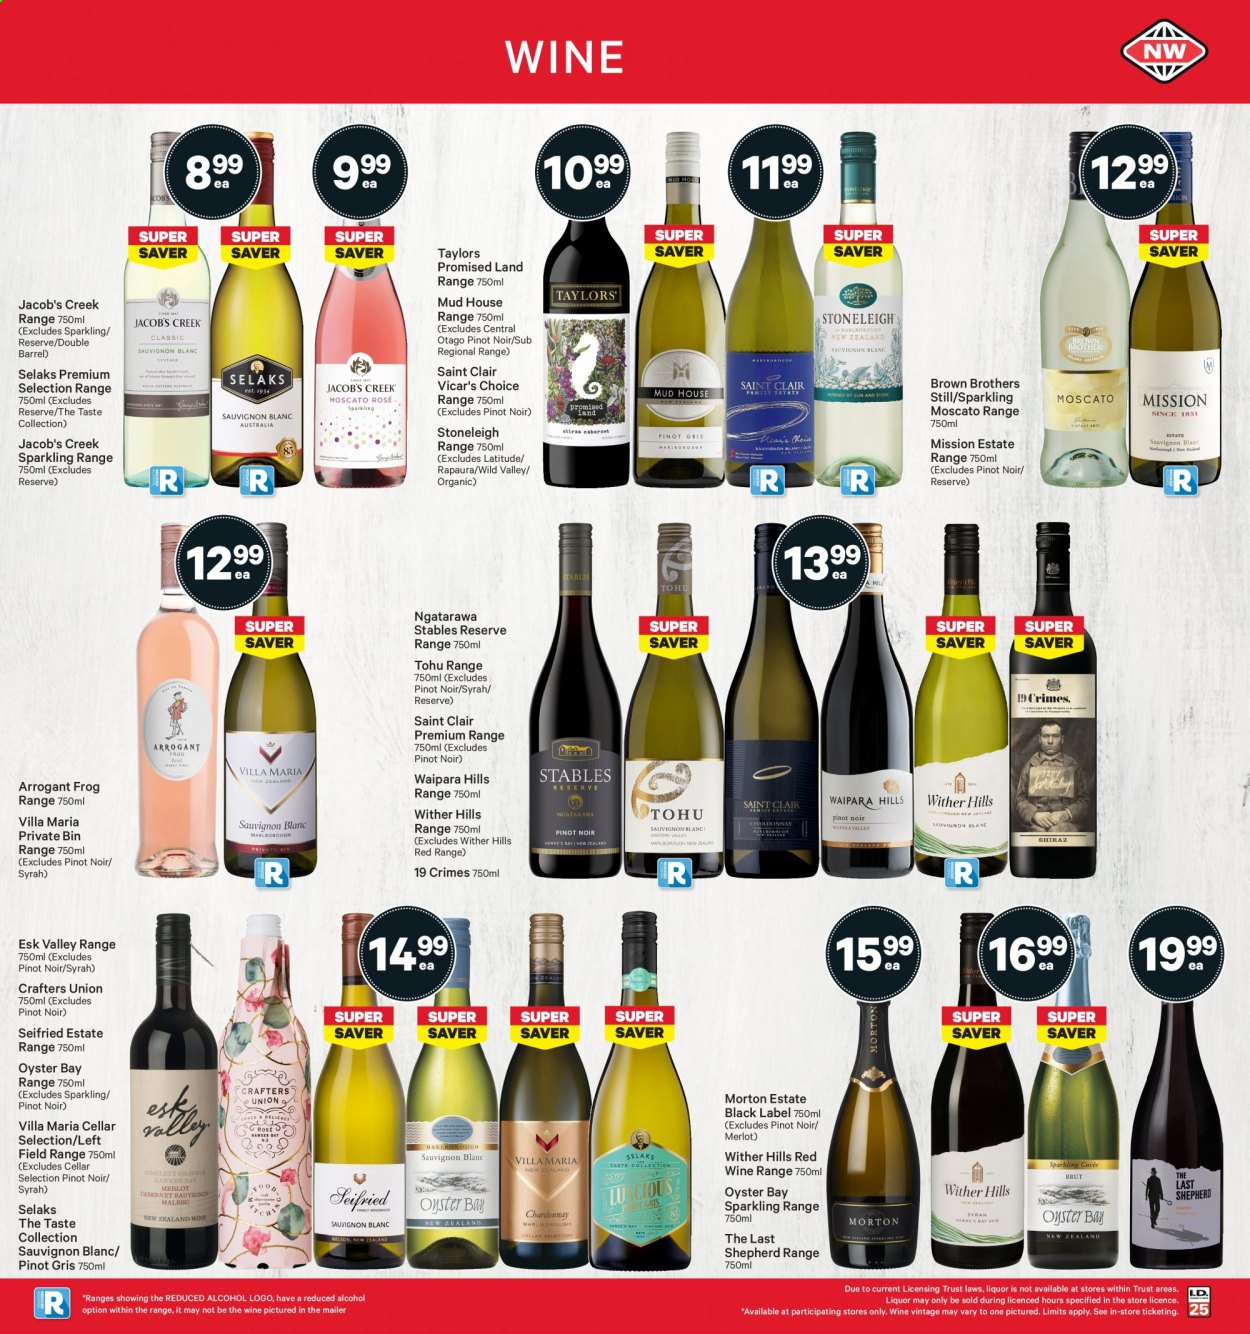 thumbnail - New World mailer - 28.06.2021 - 04.07.2021 - Sales products - oysters, red wine, white wine, wine, Merlot, Pinot Noir, alcohol, Wither Hills, Syrah, Moscato, Jacob's Creek, Pinot Grigio, Sauvignon Blanc, BROTHERS. Page 33.